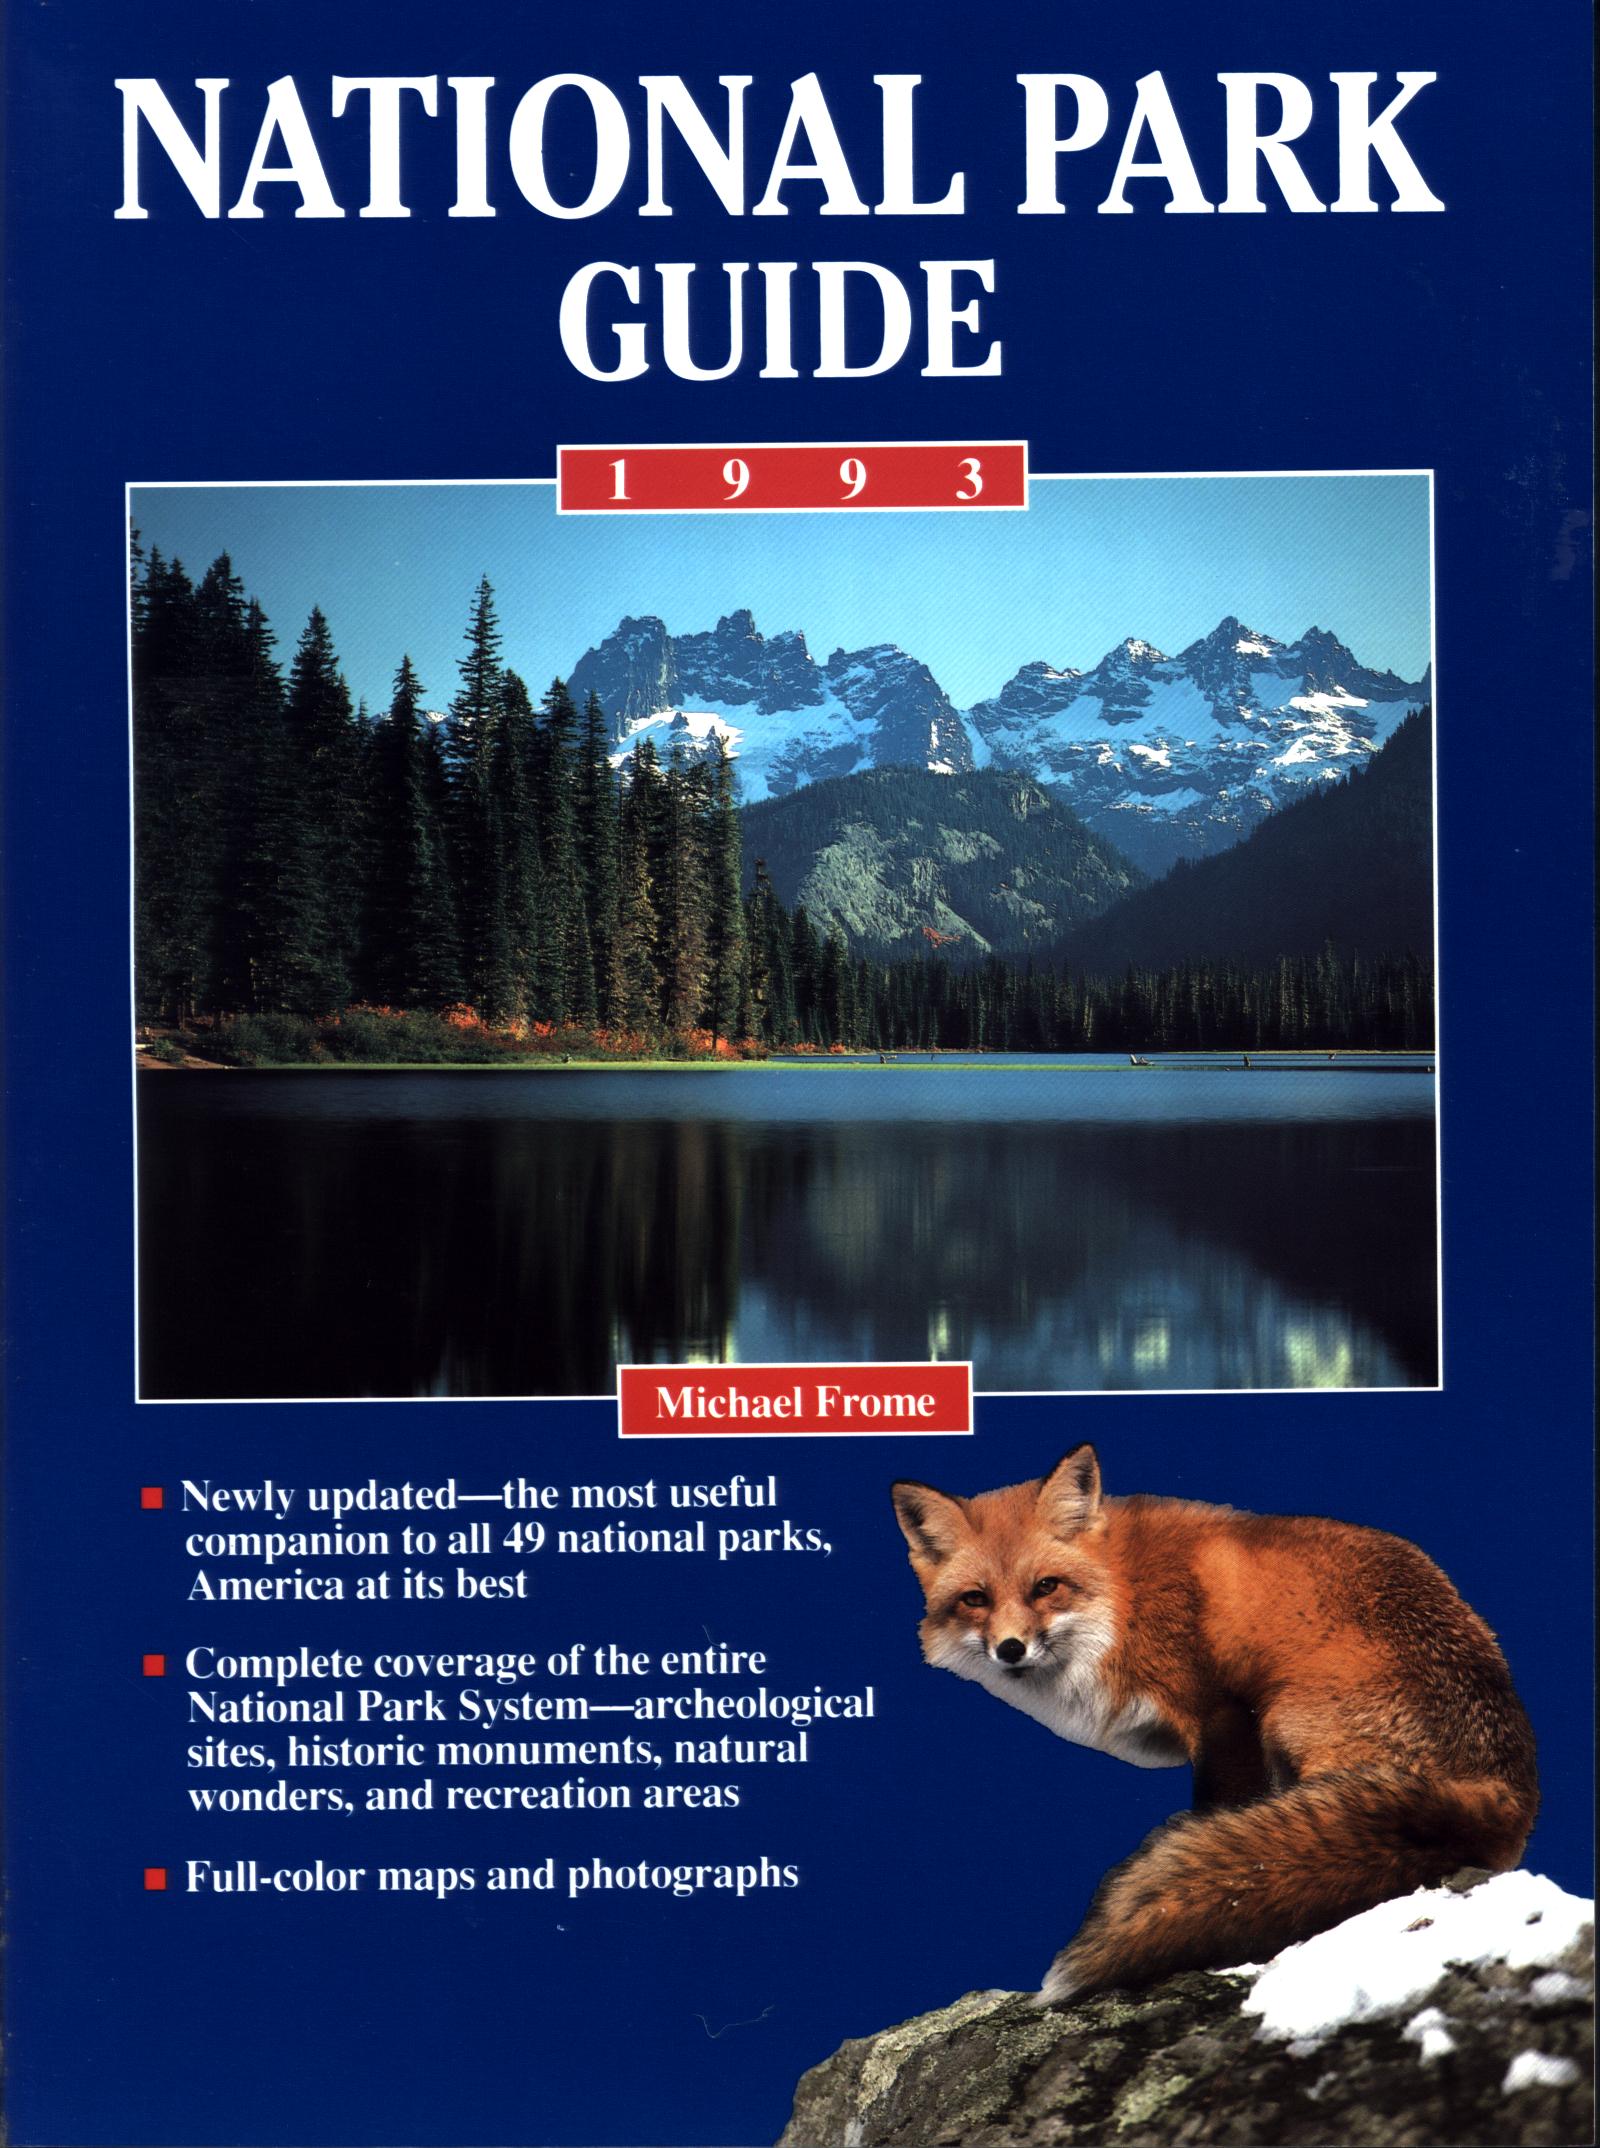 ATIONAL PARK GUIDE: 1993.